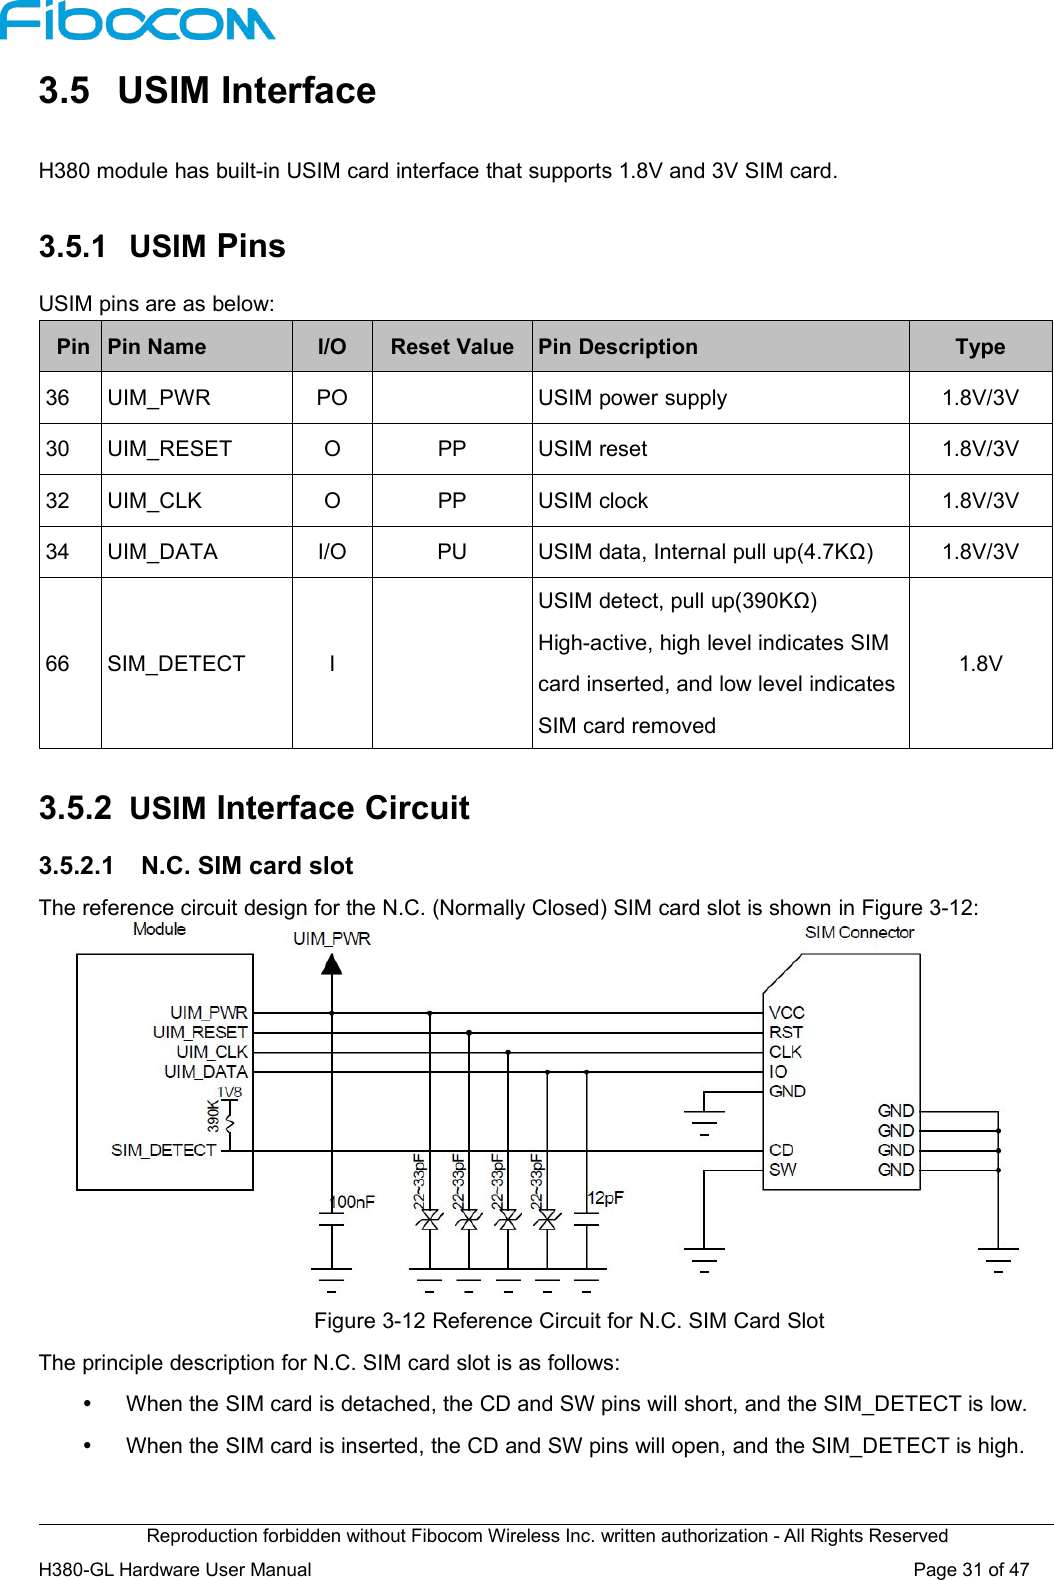 Reproduction forbidden without Fibocom Wireless Inc. written authorization - All Rights ReservedH380-GL Hardware User Manual Page31of473.5 USIM InterfaceH380 module has built-in USIM card interface that supports 1.8V and 3V SIM card.3.5.1 USIM PinsUSIM pins are as below:PinPin NameI/OReset ValuePin DescriptionType36UIM_PWRPOUSIM power supply1.8V/3V30UIM_RESETOPPUSIM reset1.8V/3V32UIM_CLKOPPUSIM clock1.8V/3V34UIM_DATAI/OPUUSIM data, Internal pull up(4.7KΩ)1.8V/3V66SIM_DETECTIUSIM detect, pull up(390KΩ)High-active, high level indicates SIMcard inserted, and low level indicatesSIM card removed1.8V3.5.2 USIM Interface Circuit3.5.2.1 N.C. SIM card slotThe reference circuit design for the N.C. (Normally Closed) SIM card slot is shown in Figure 3-12:Figure 3-12 Reference Circuit for N.C. SIM Card SlotThe principle description for N.C. SIM card slot is as follows:When the SIM card is detached, the CD and SW pins will short, and the SIM_DETECT is low.When the SIM card is inserted, the CD and SW pins will open, and the SIM_DETECT is high.